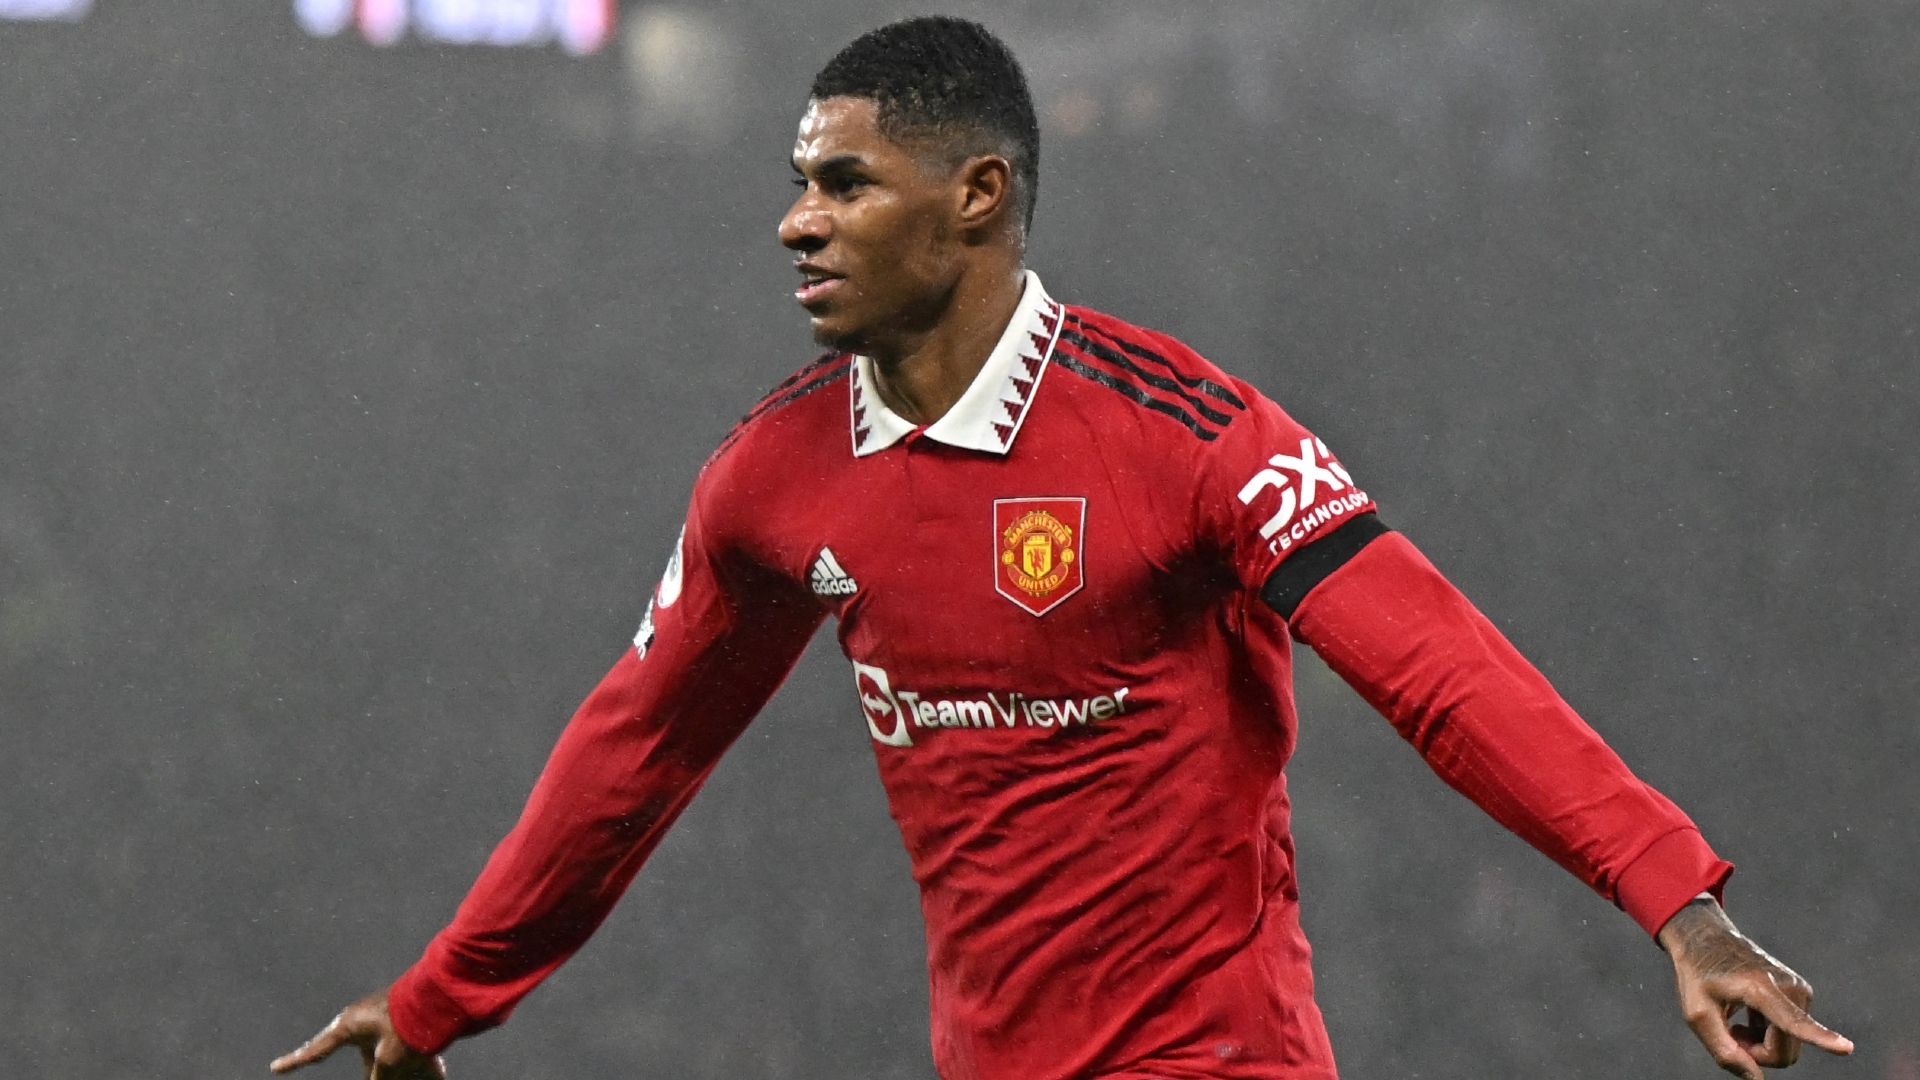 WATCH: Straight from the training ground! Rashford puts Man Utd ahead  against Nottingham Forest after clever corner routine | Goal.com Australia